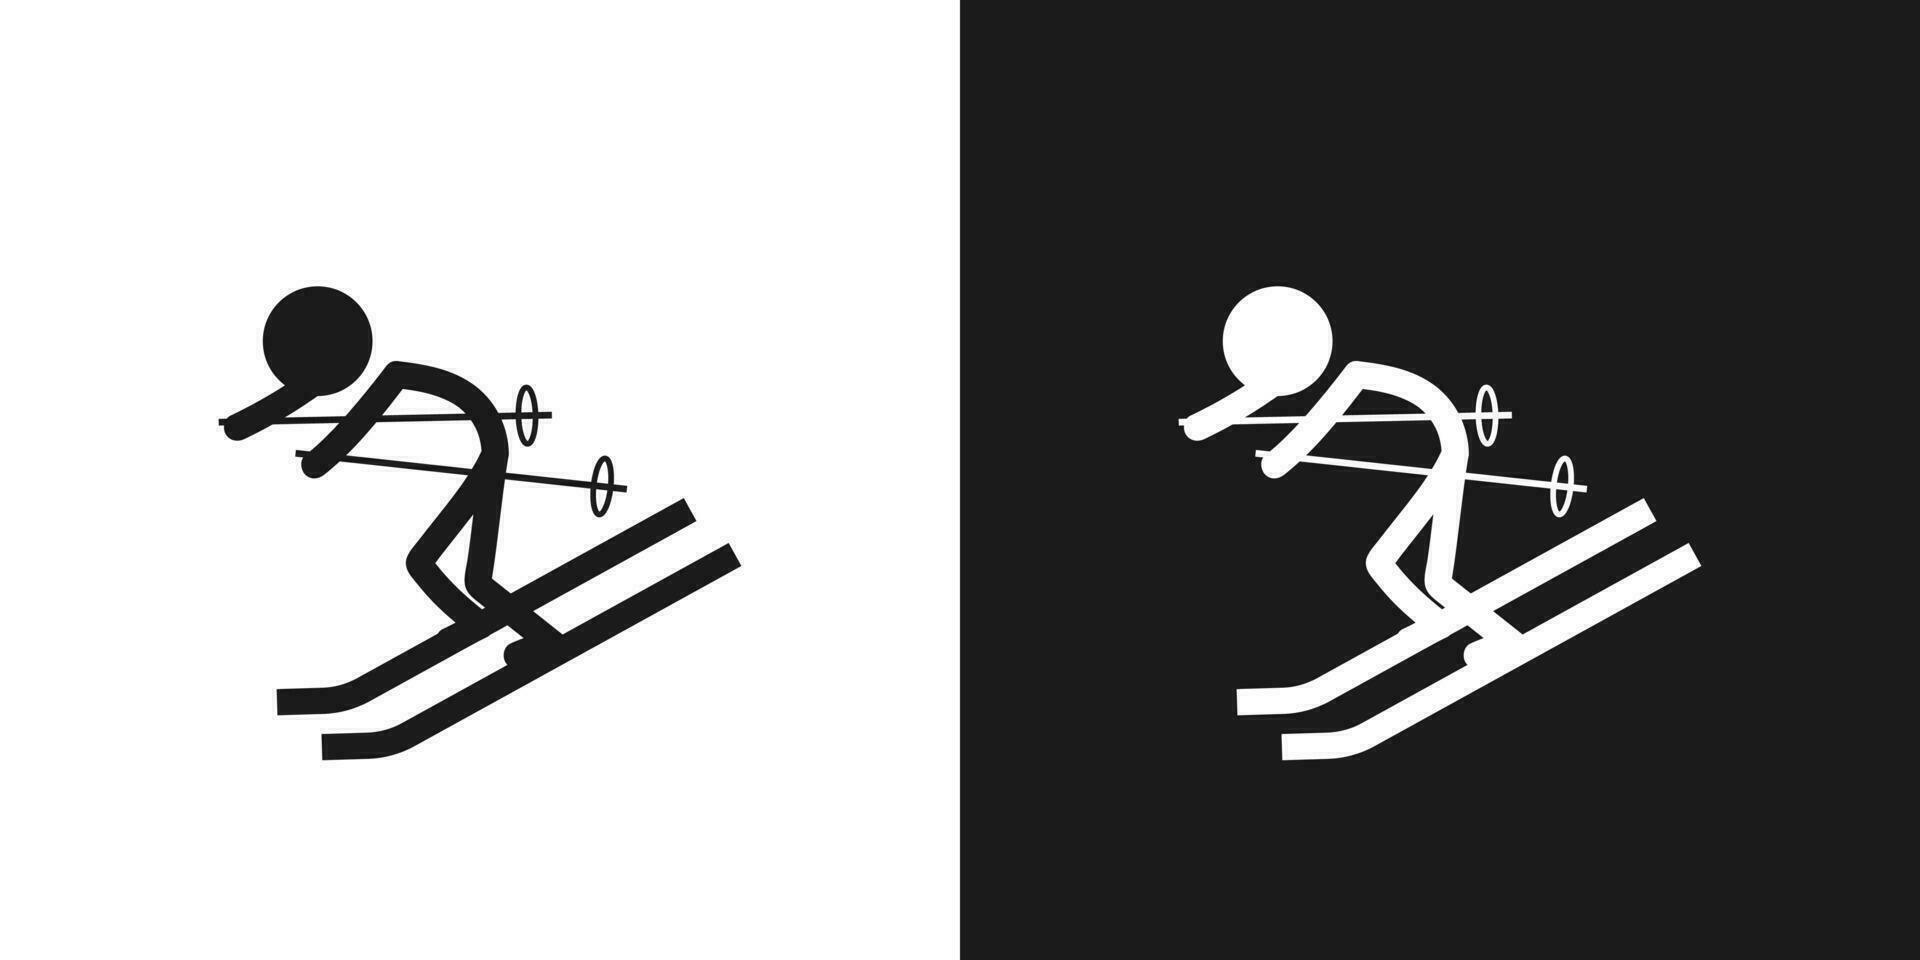 Snow skiing icon pictogram vector design. Stick figure man sports player skier vector icon sign symbol pictogram. Alpine skiing, downhill skiing icon